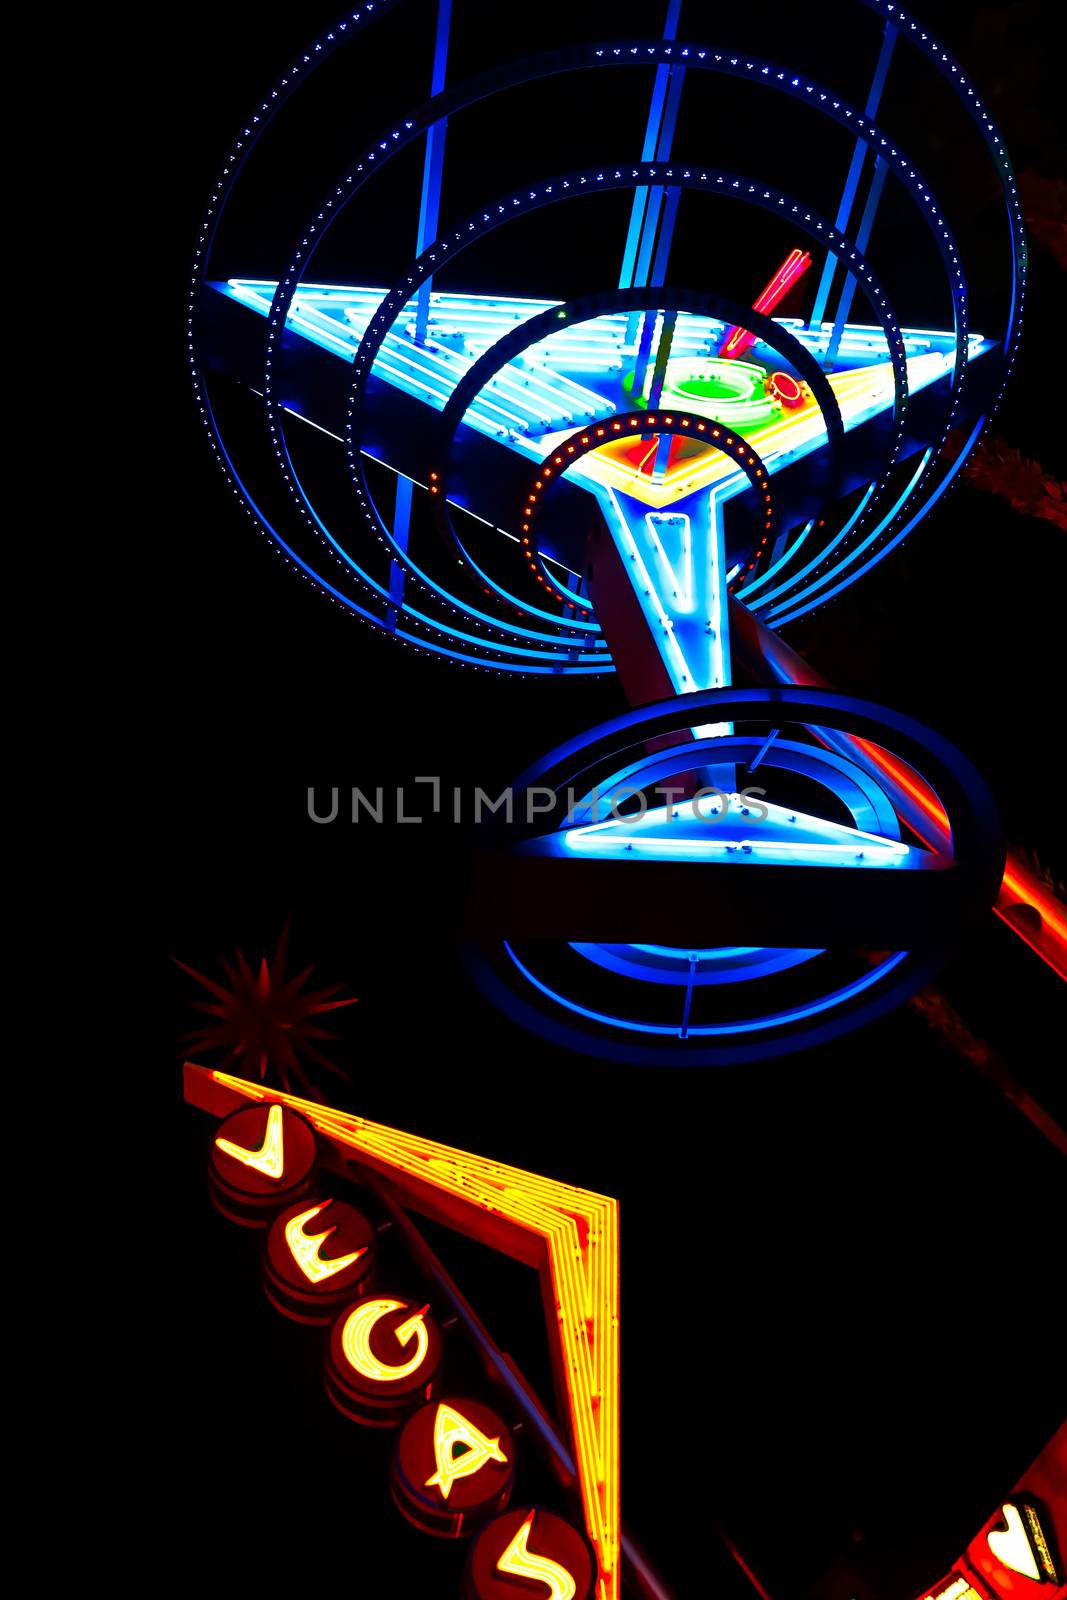 Las Vegas,NV/USA - Oct 09,2016 : "Oscar's Neon Martini Glass"  and Vegas giant neon sign on display above the street near Fremont Street Experience in Las Vegas.The Fremont Street Experience is a pedestrian mall and attraction in downtown Las Vegas. by USA-TARO